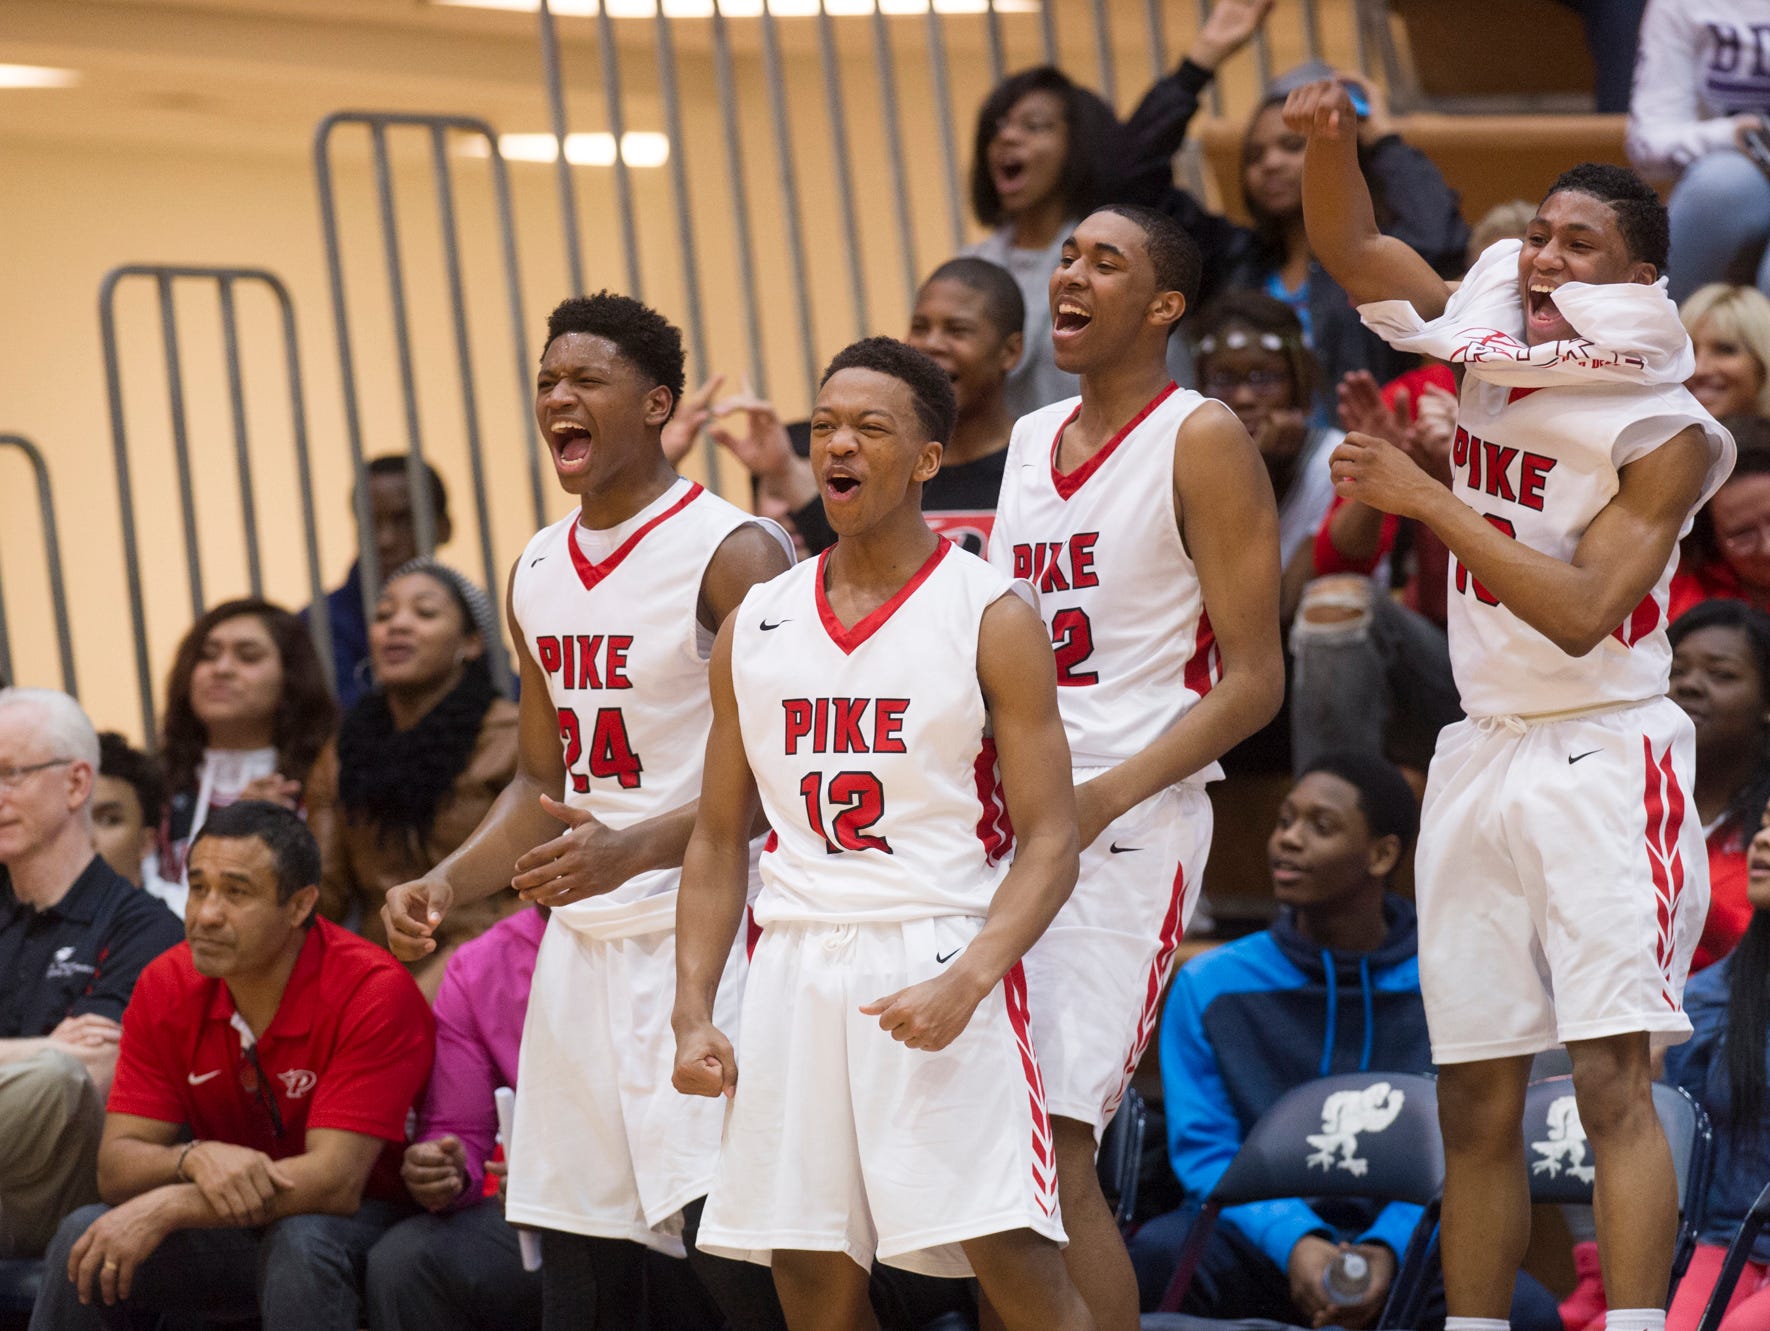 Boys sectionals: Southport, Pike to meet again | USA TODAY High School ...